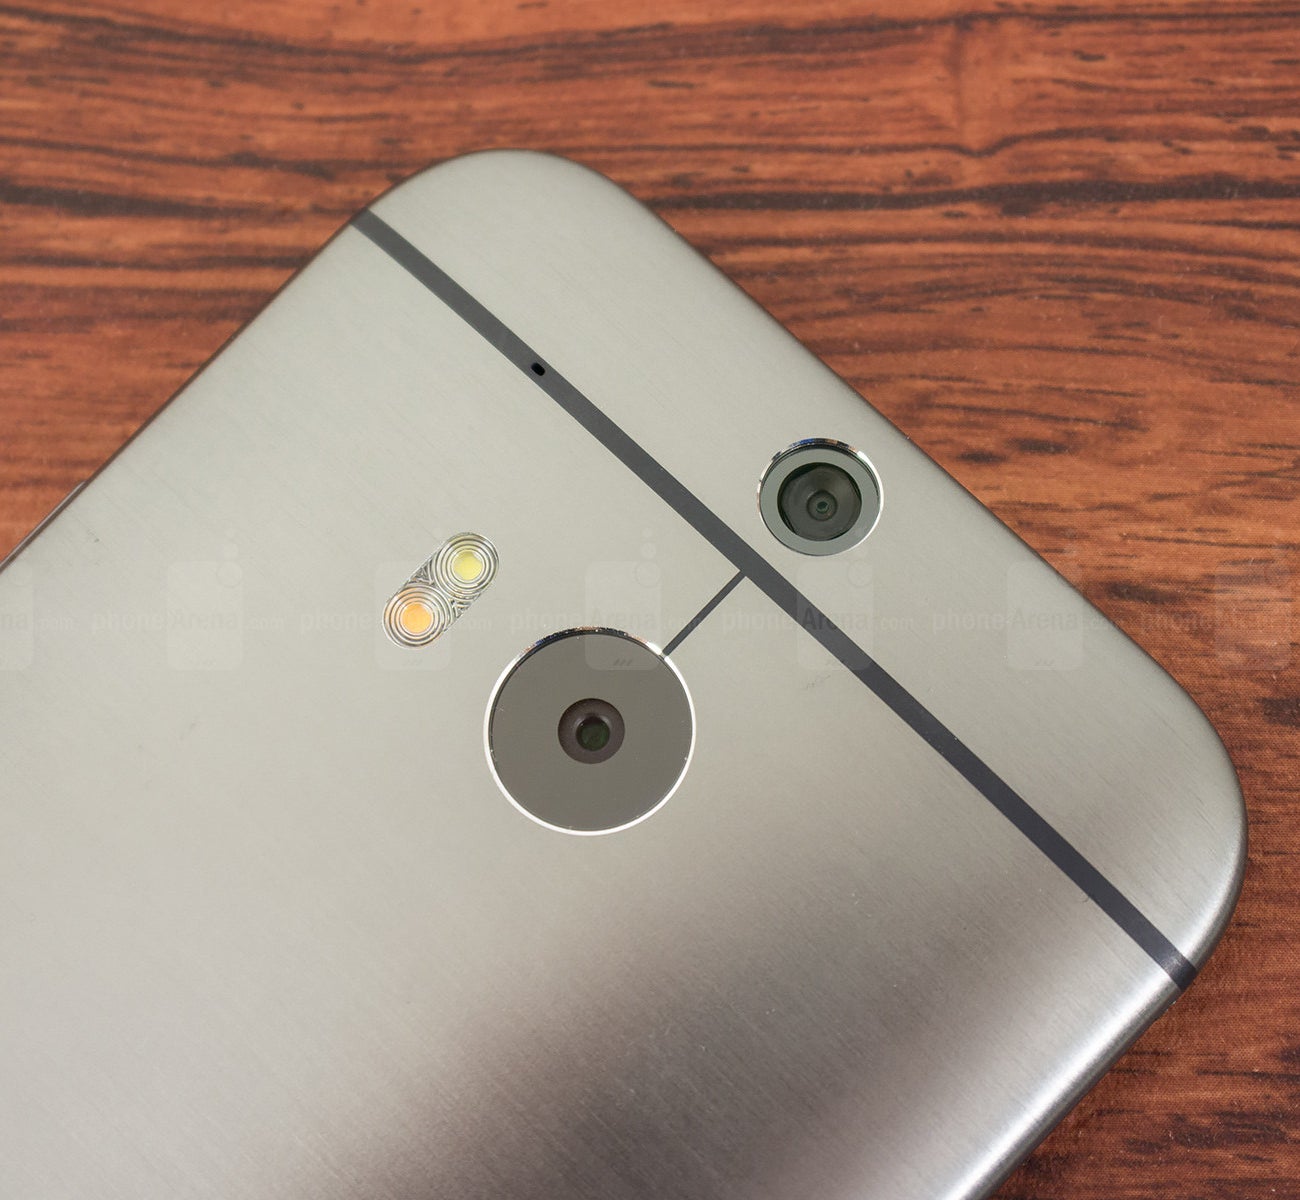 The dual camera on the 2014 HTC One M8 - A new leak reveals the HTC U life series will live on...